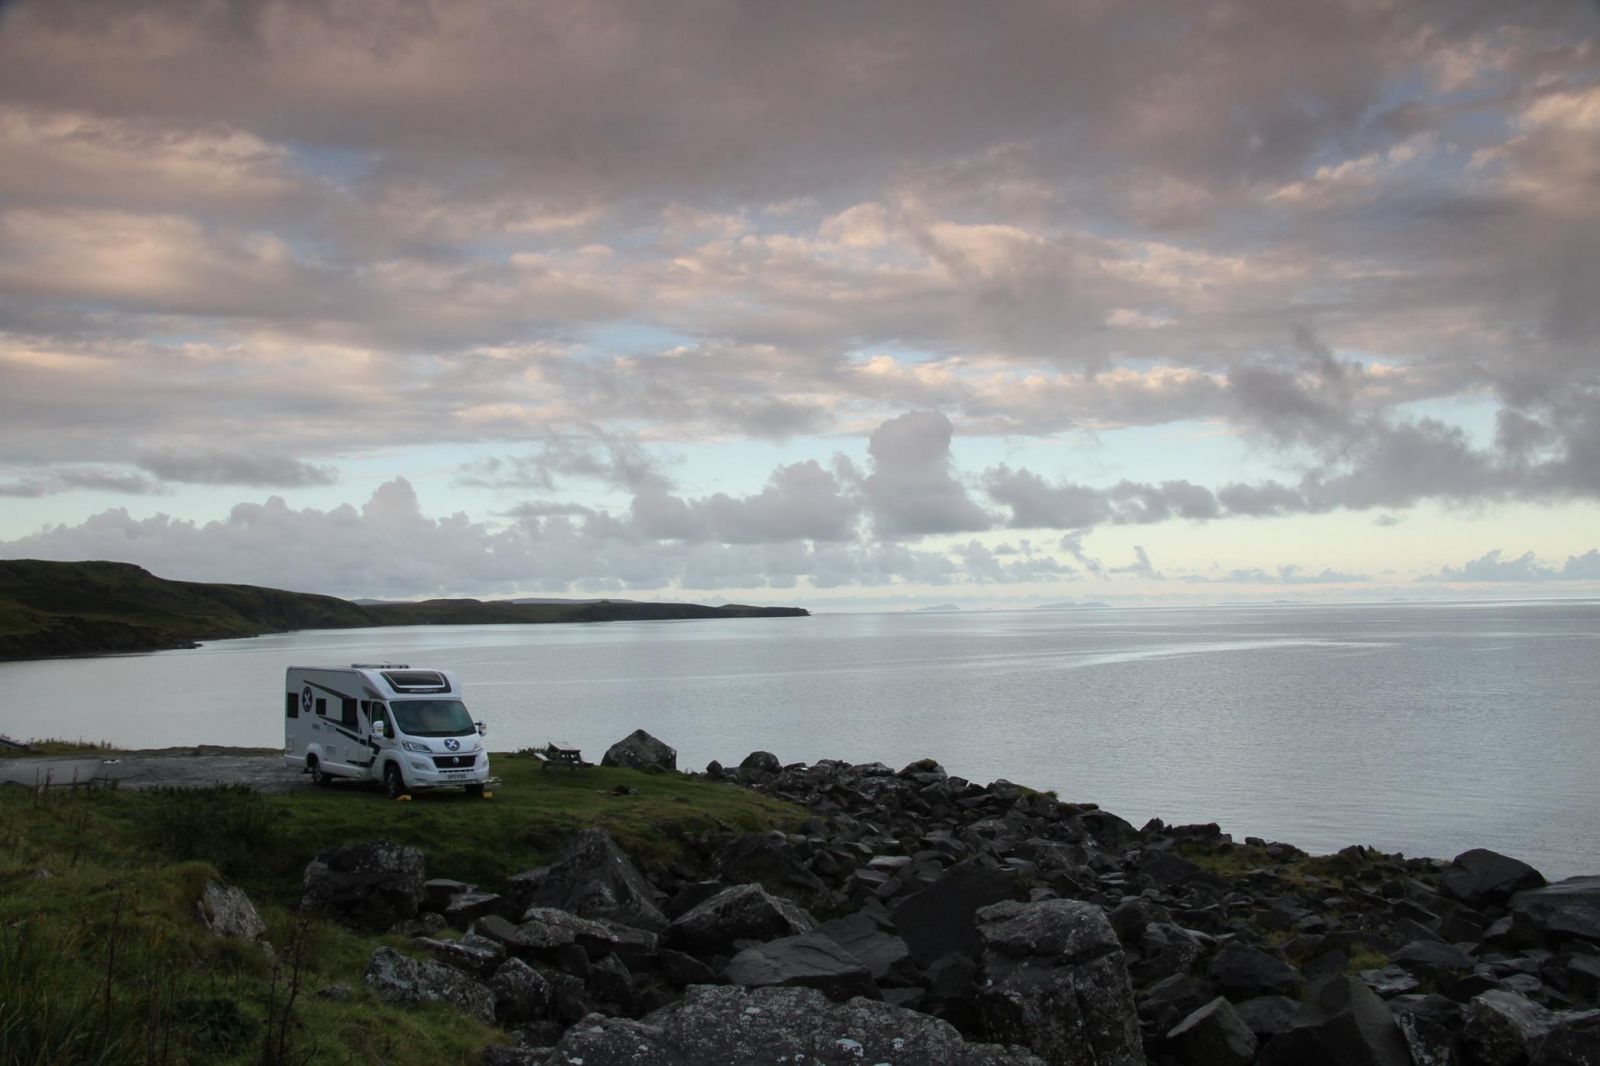 stunning skyline with the motorhome parked for the night